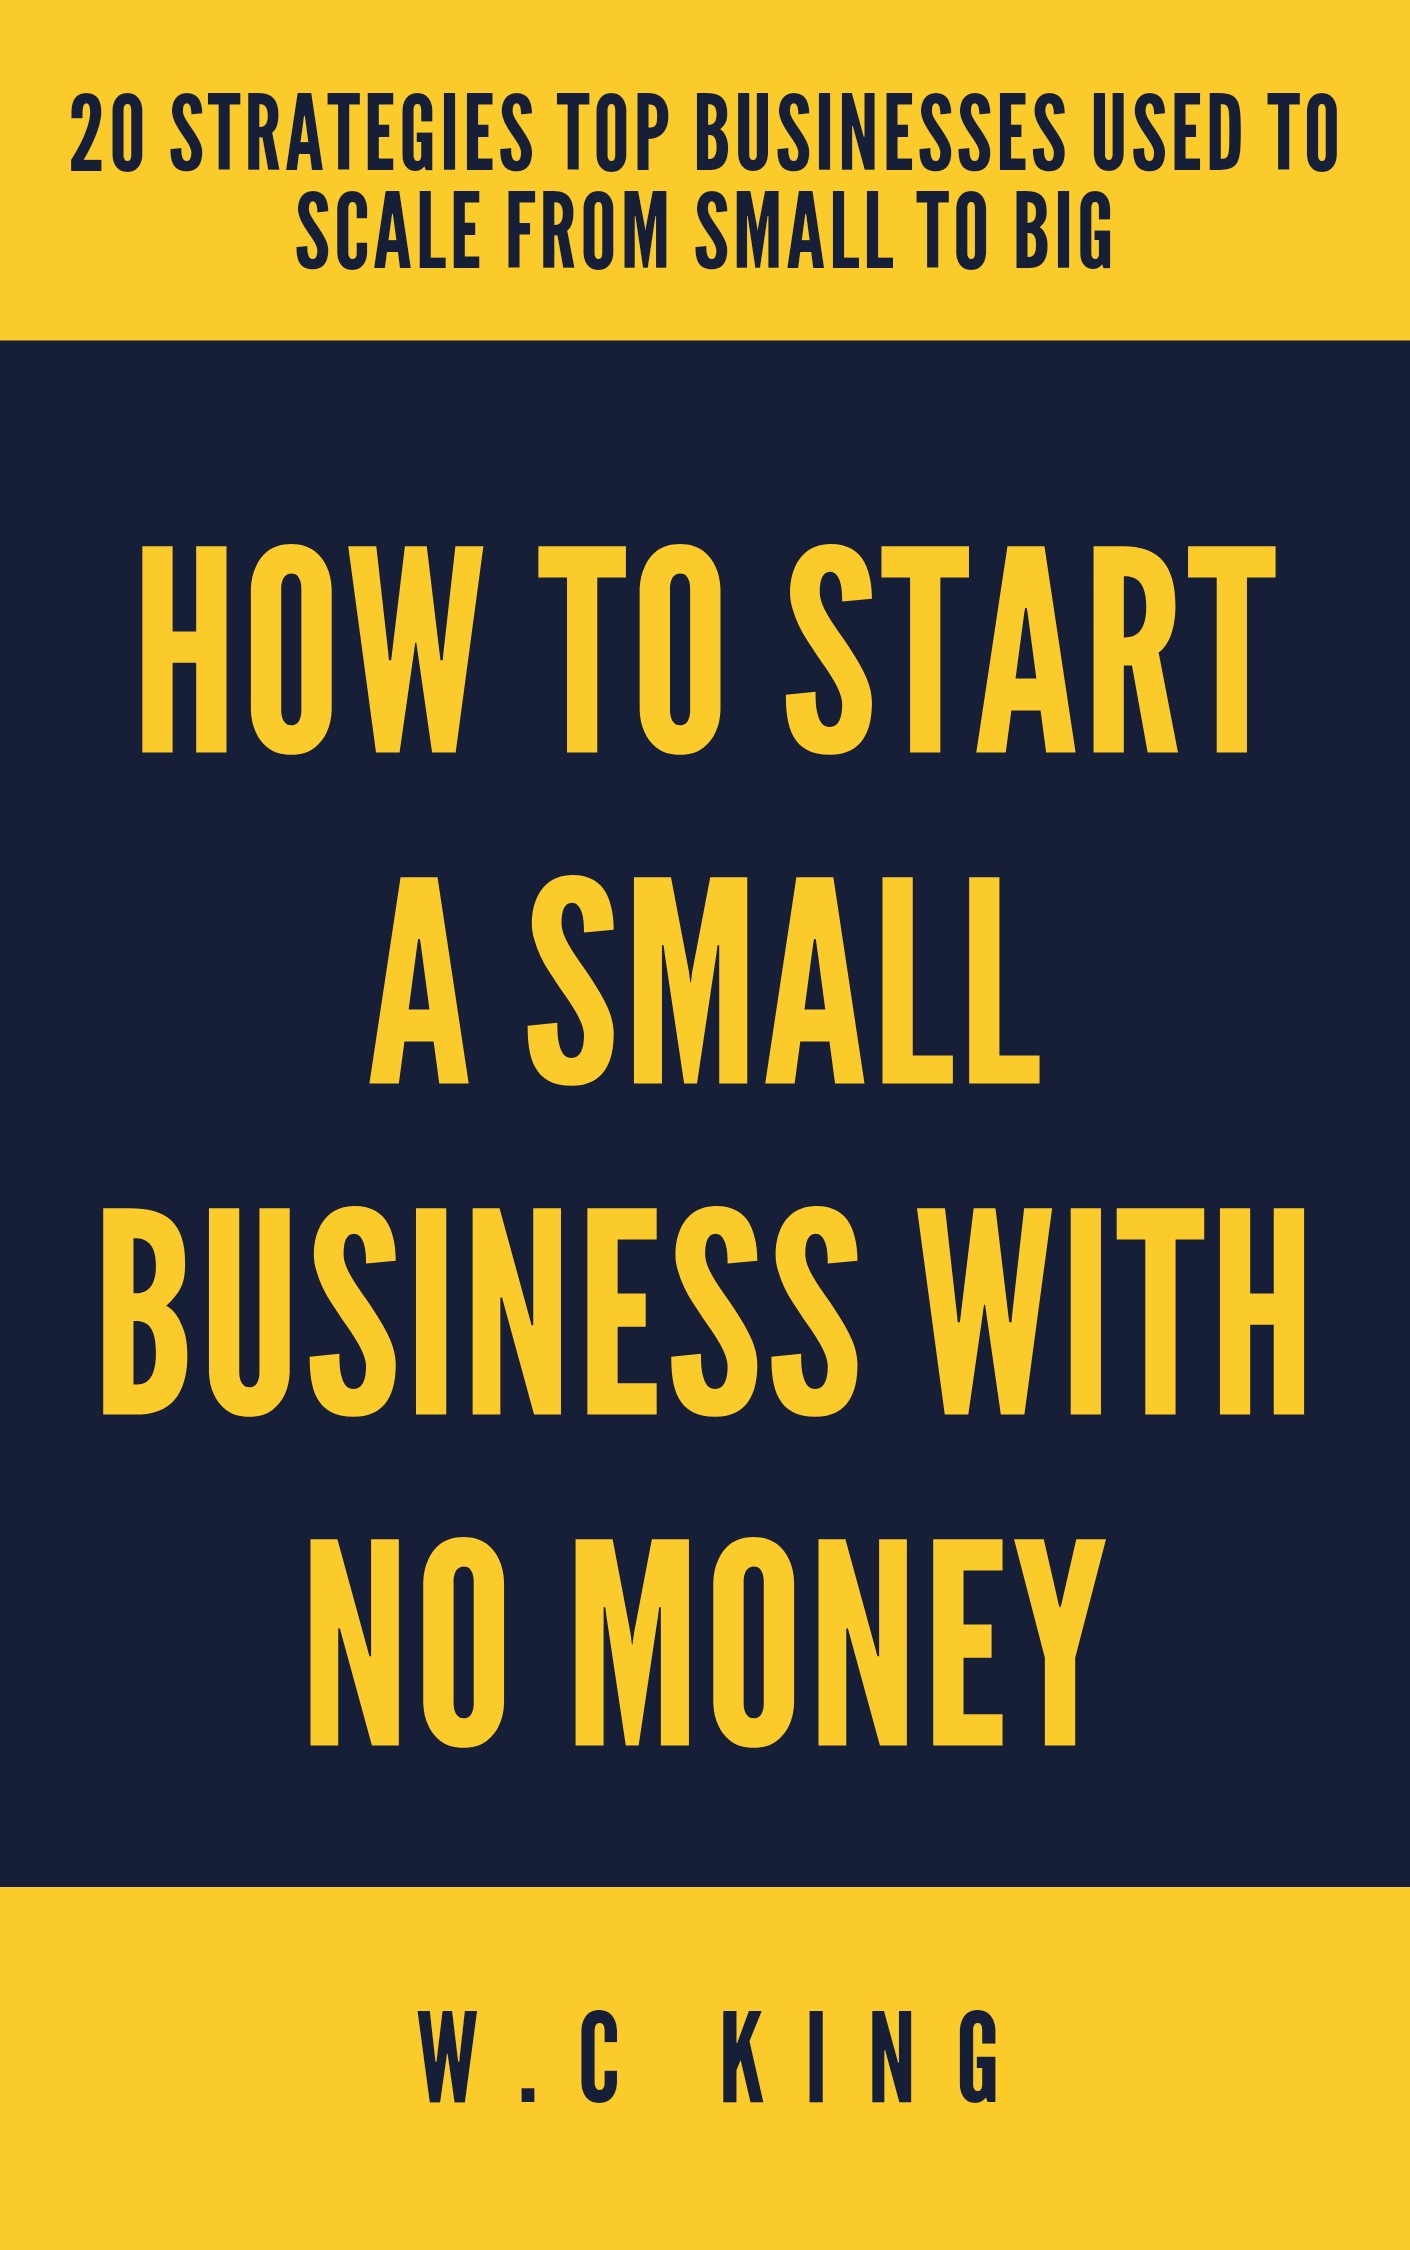 How-to-Start-a-Small-Business-With-No-Money